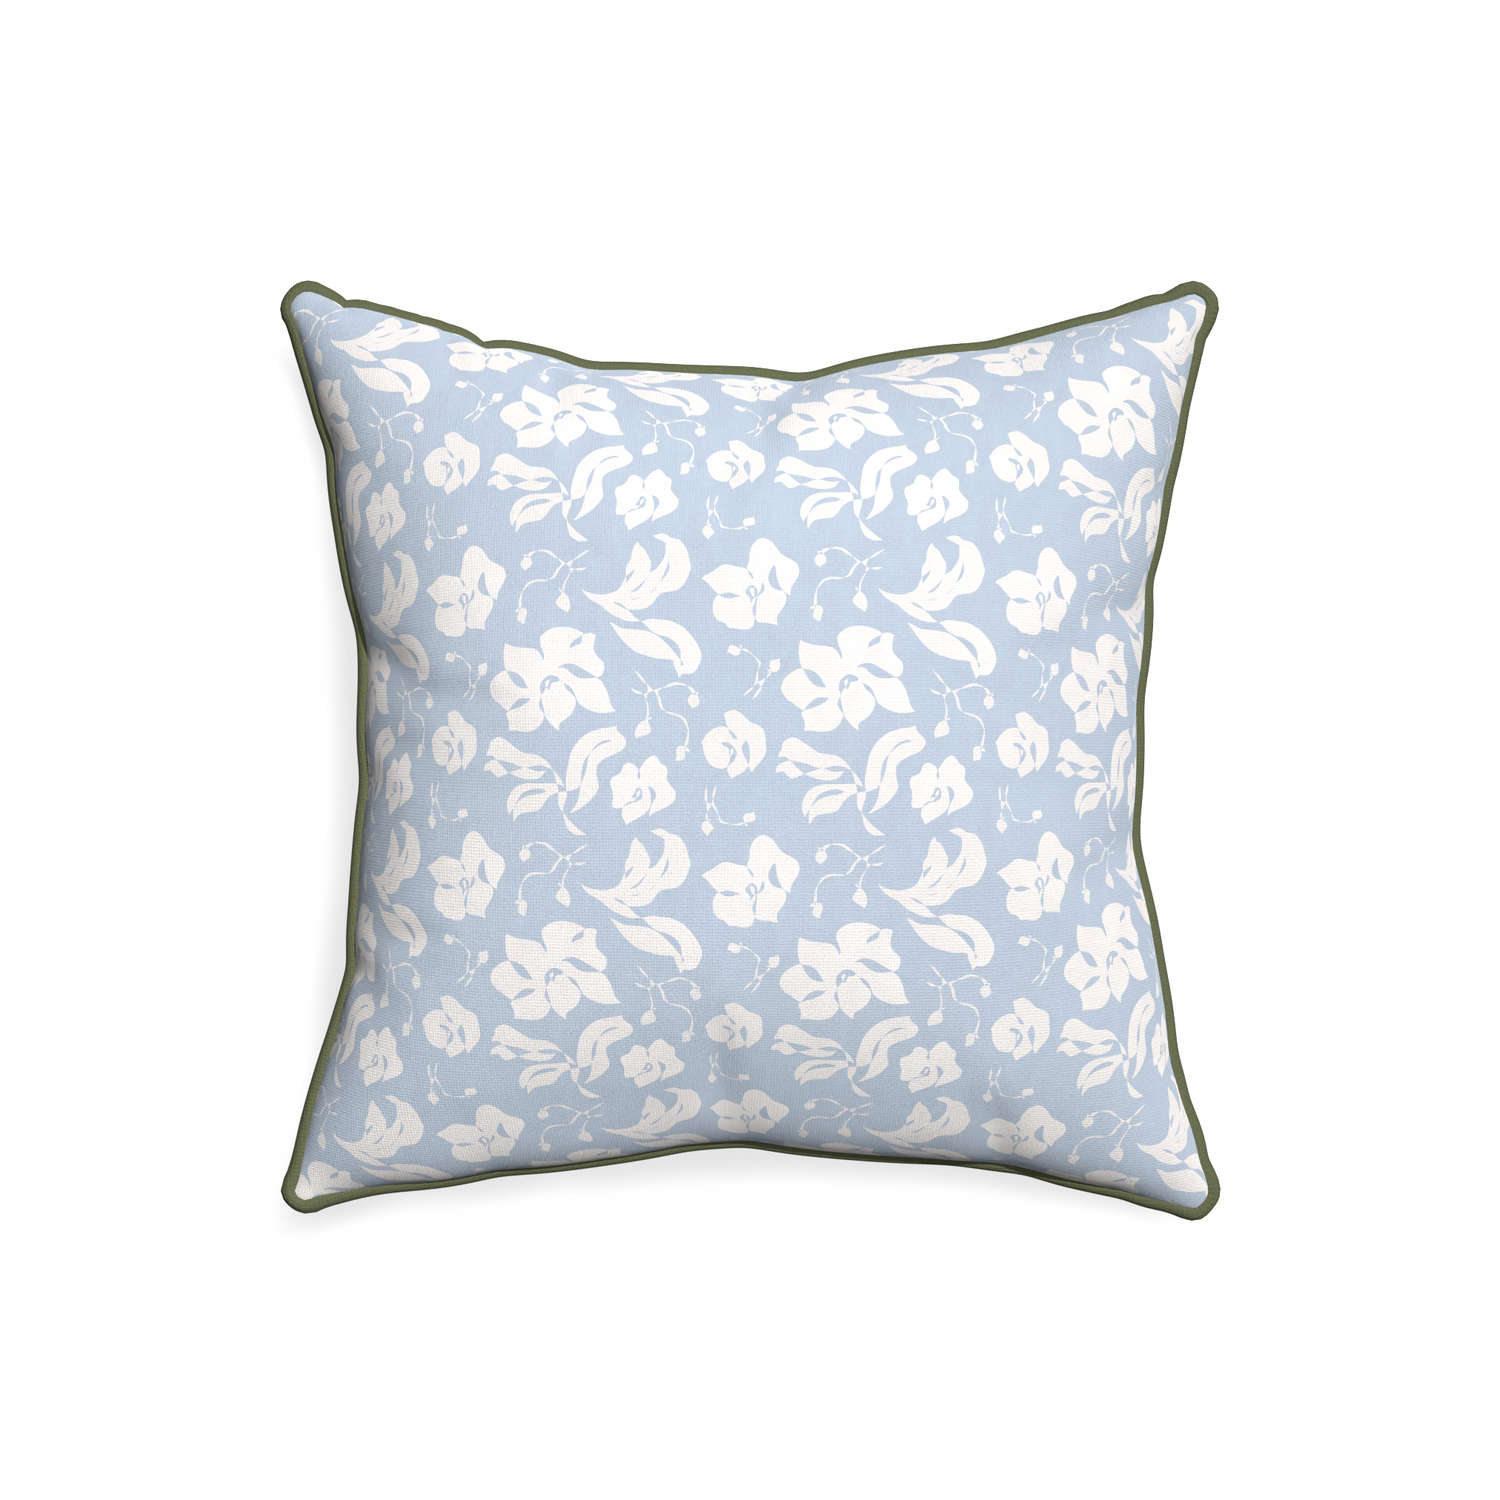 20-square georgia custom pillow with f piping on white background